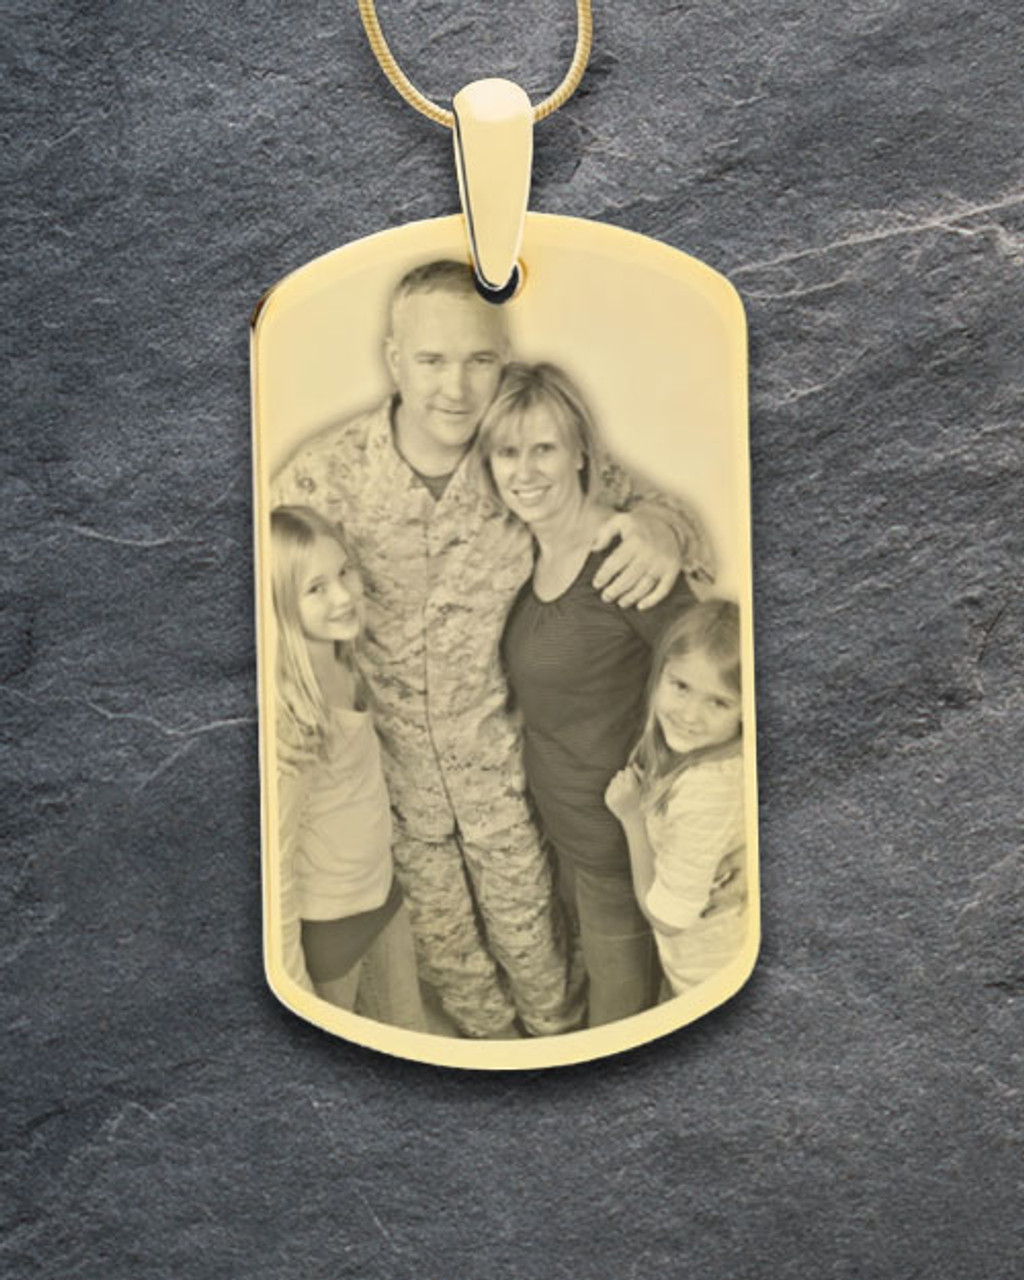 Personalized Gold Plate Dog Tag Key Chain